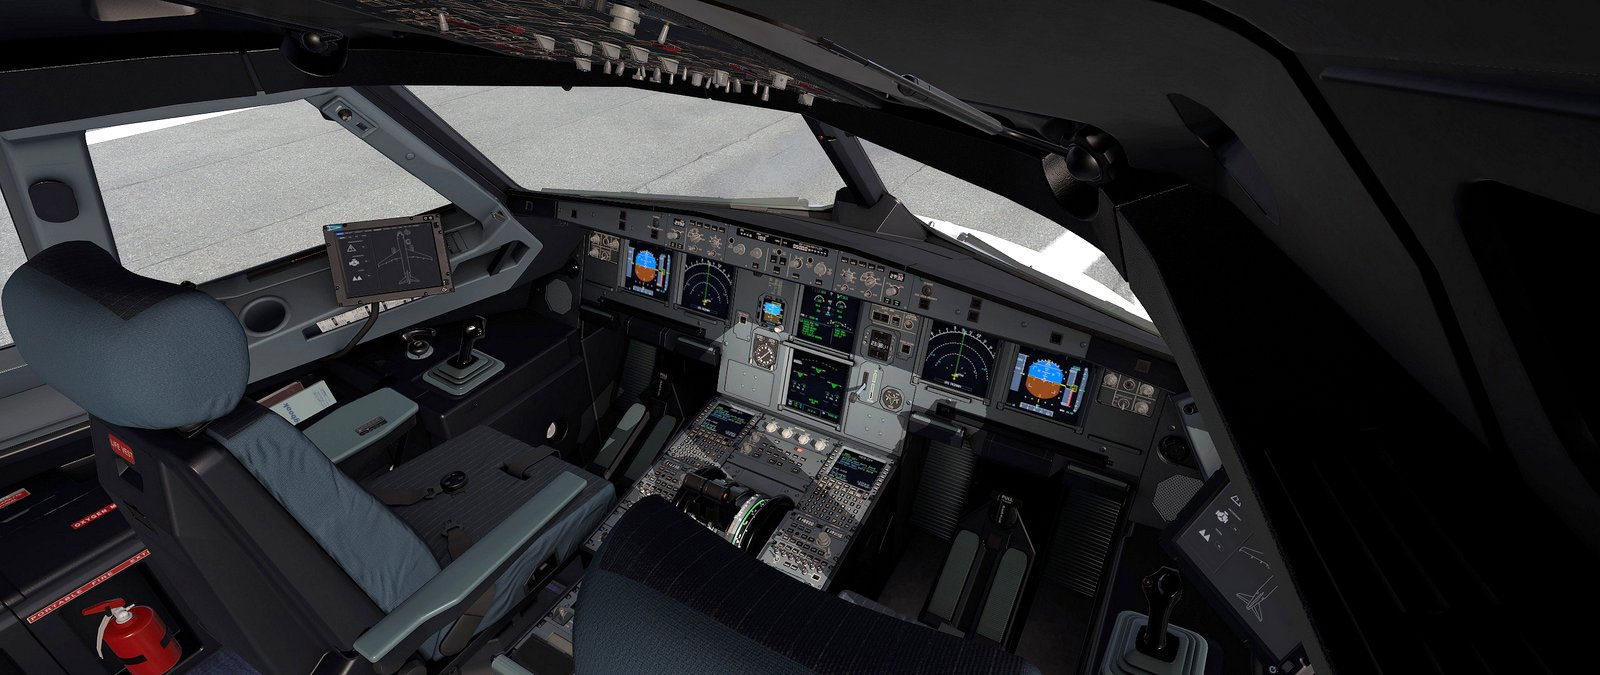 A320 Ultimate Extended XP12